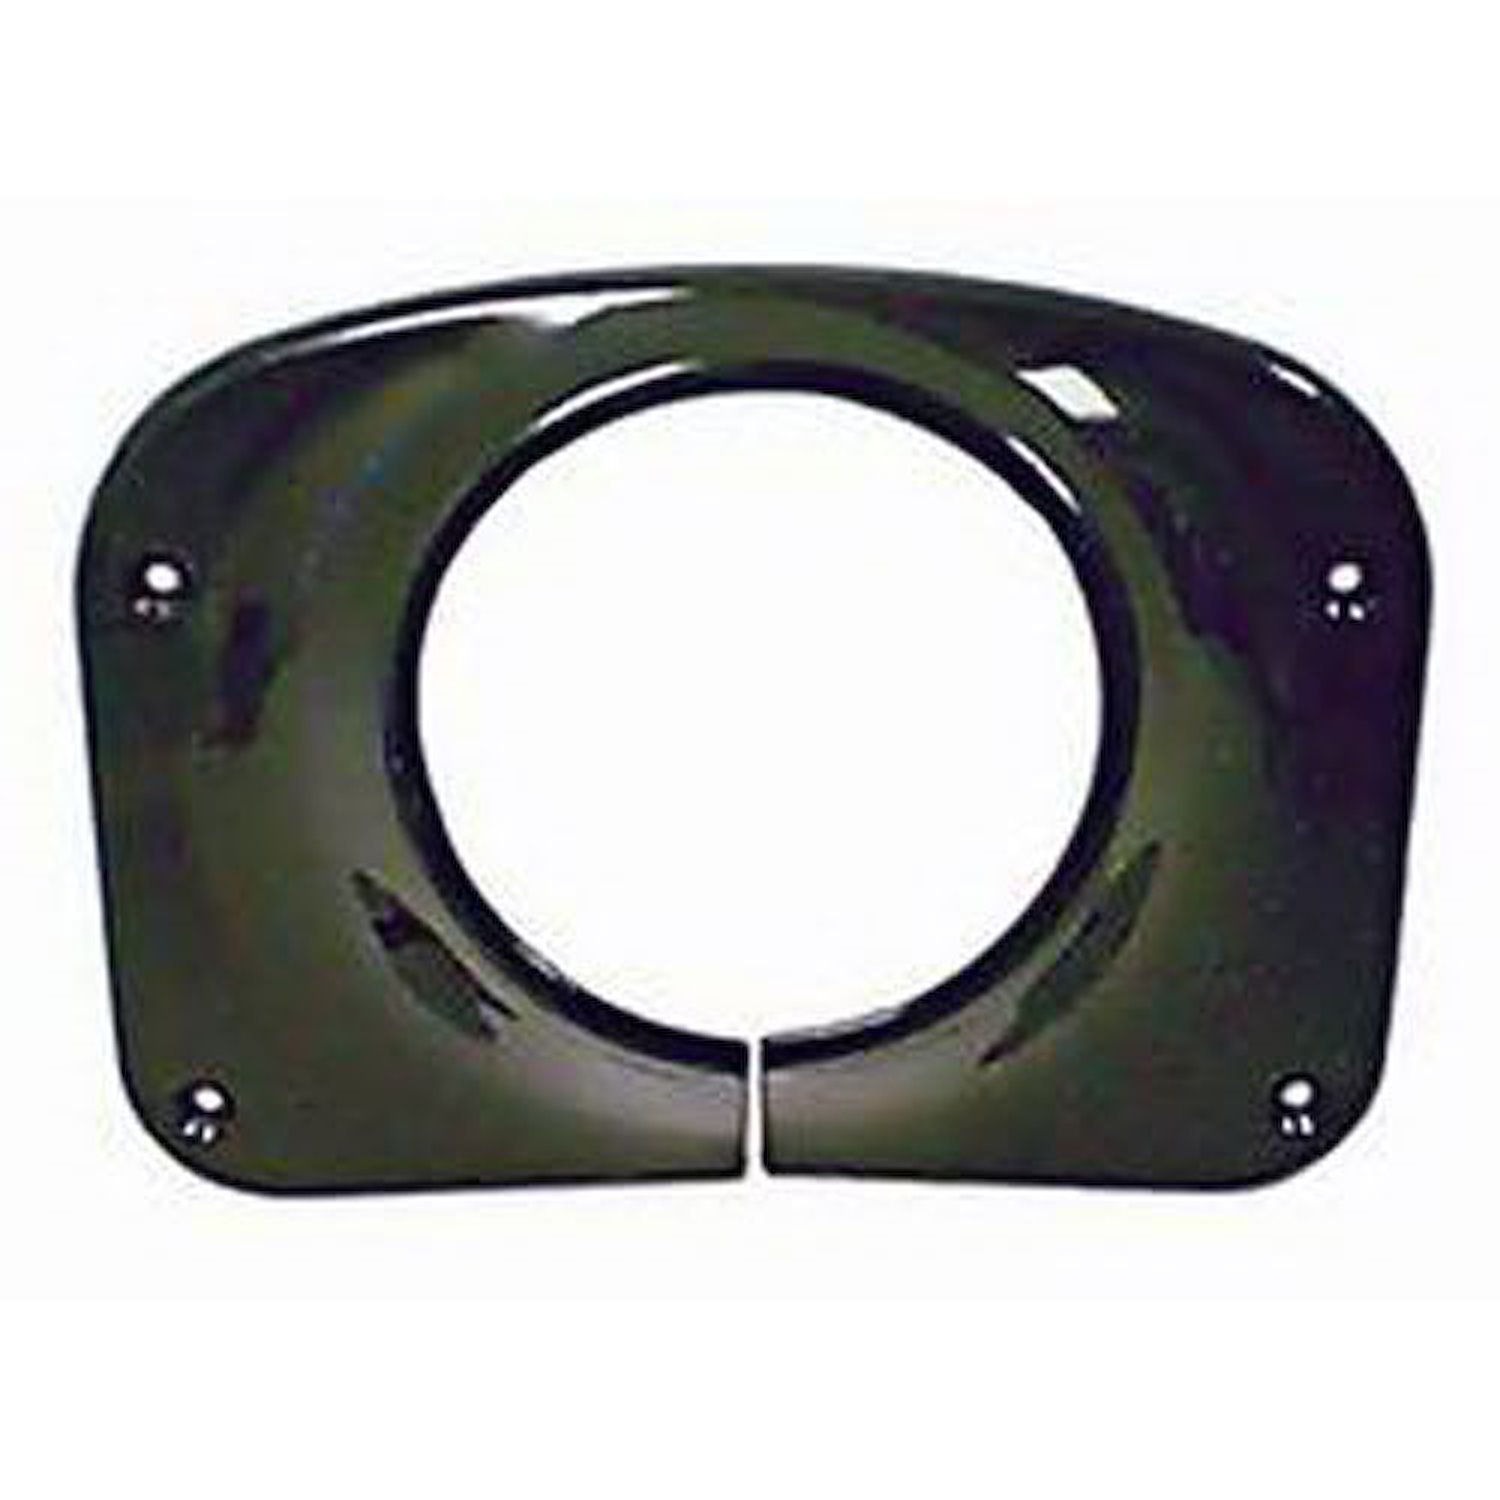 This black steering column cover from Rugged Ridge